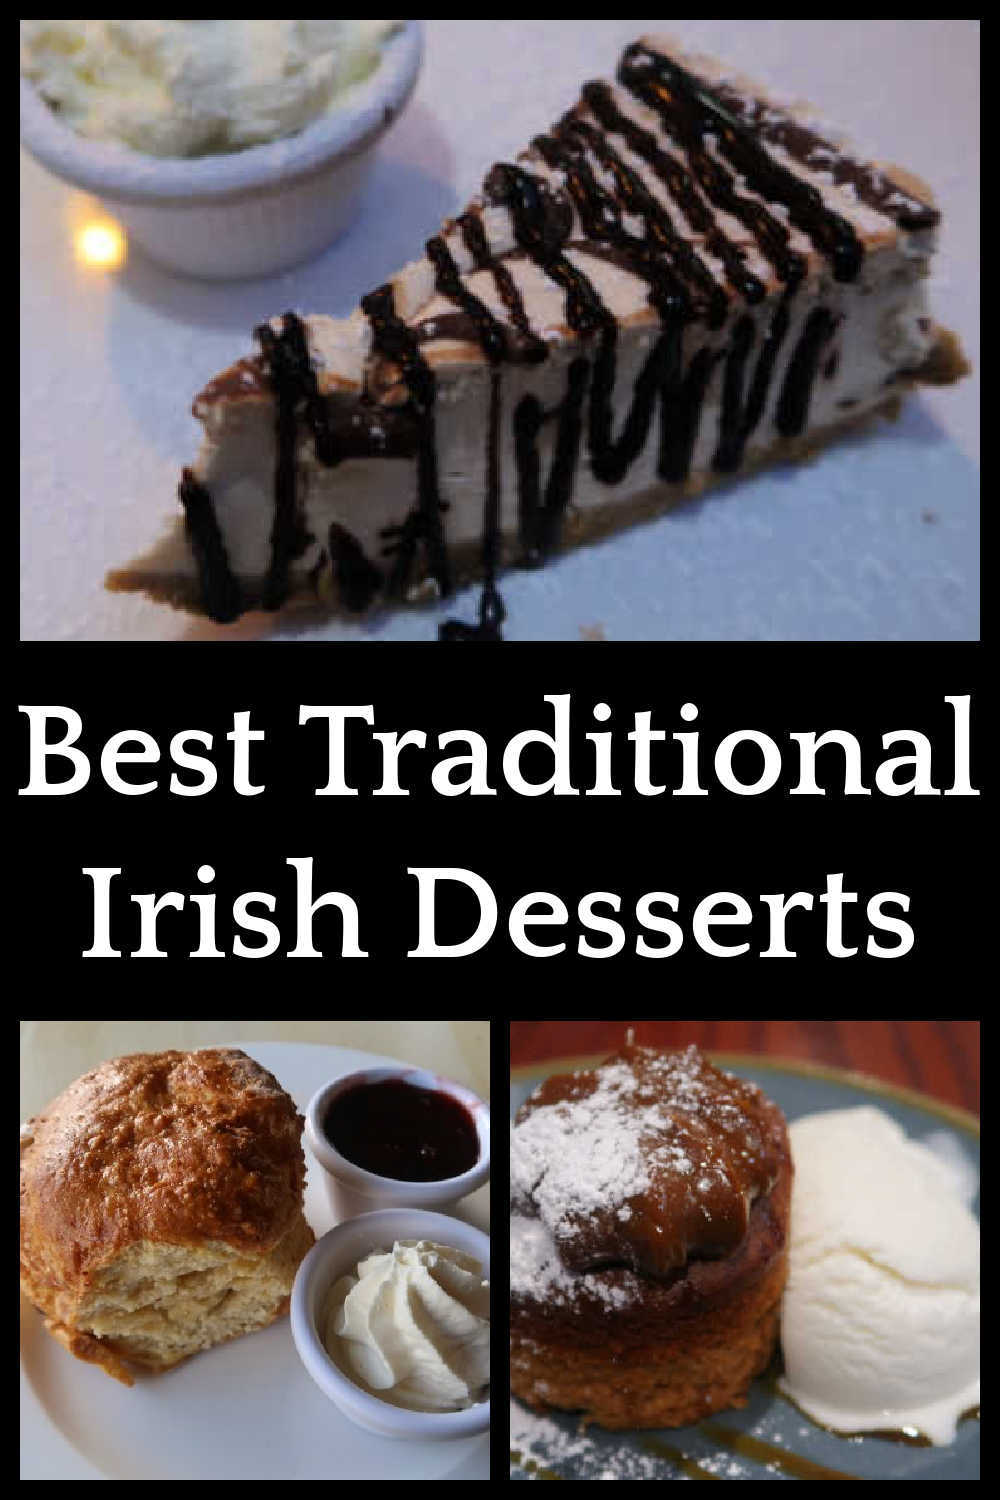 Traditional Irish Desserts - the best authentic classic dishes you can enjoy for dessert treats - for all year and your St. Patrick's Day celebration party.